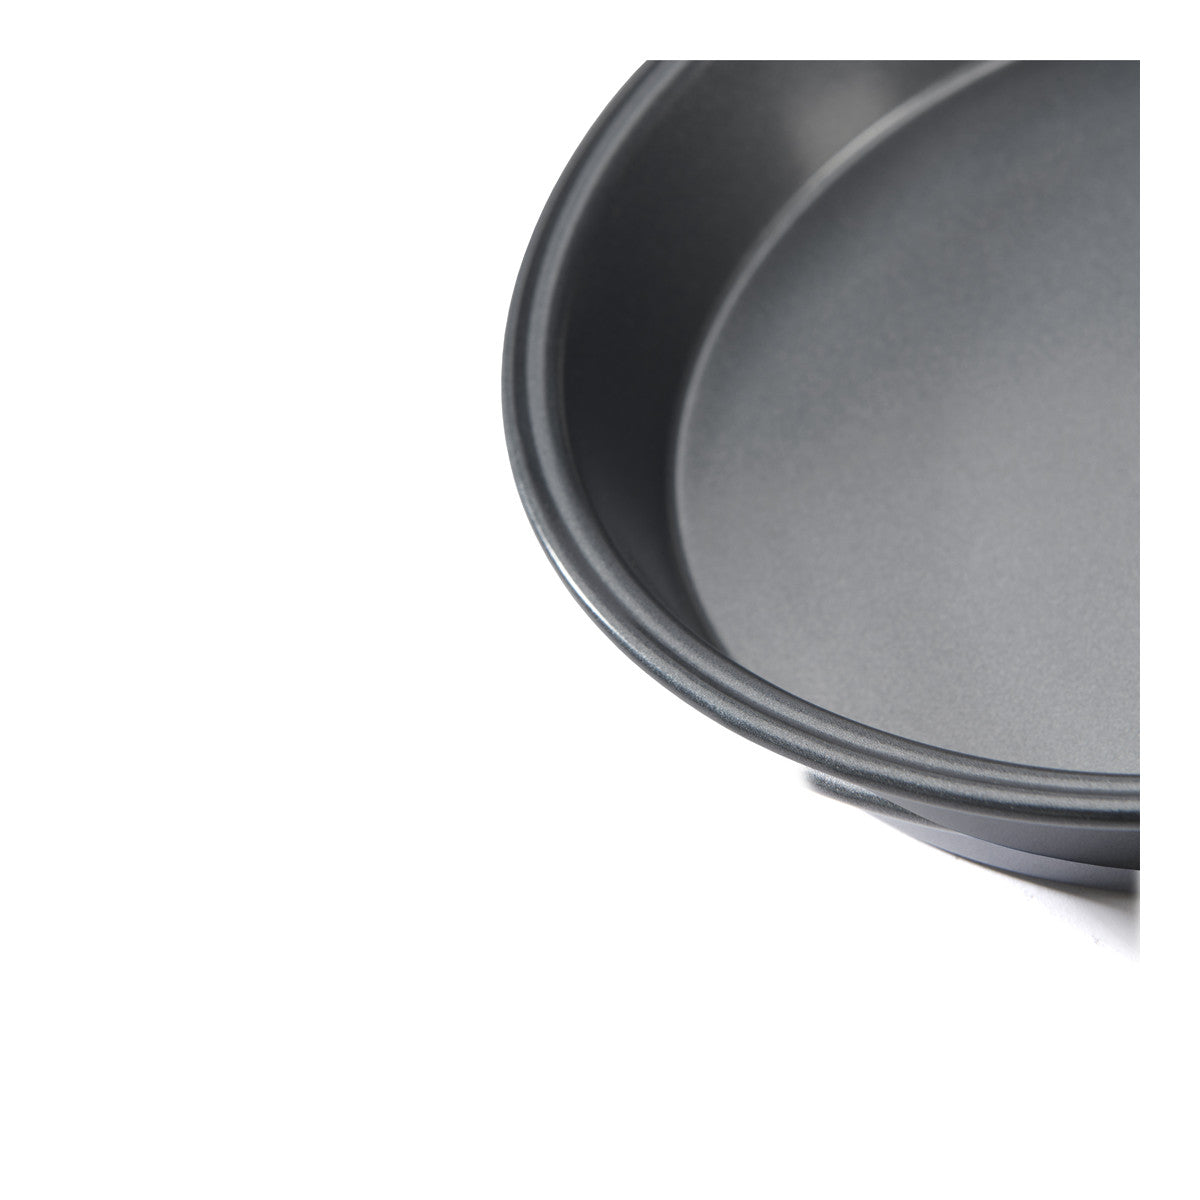 Round pastry mould, non-stick